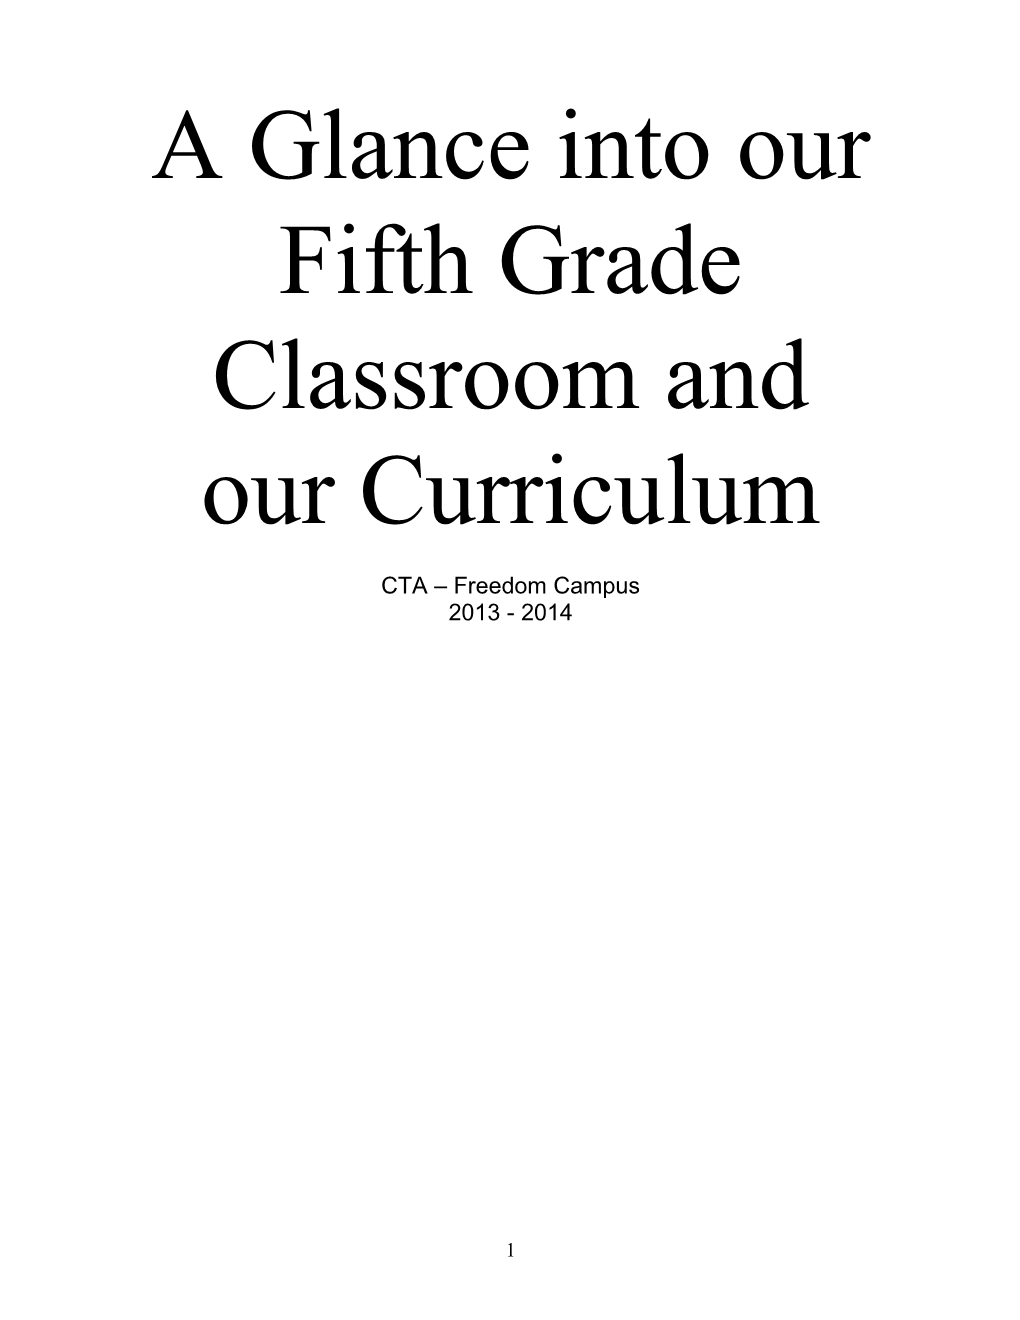 A Glance Into Our Fifth Grade Classroom and Our Curriculum